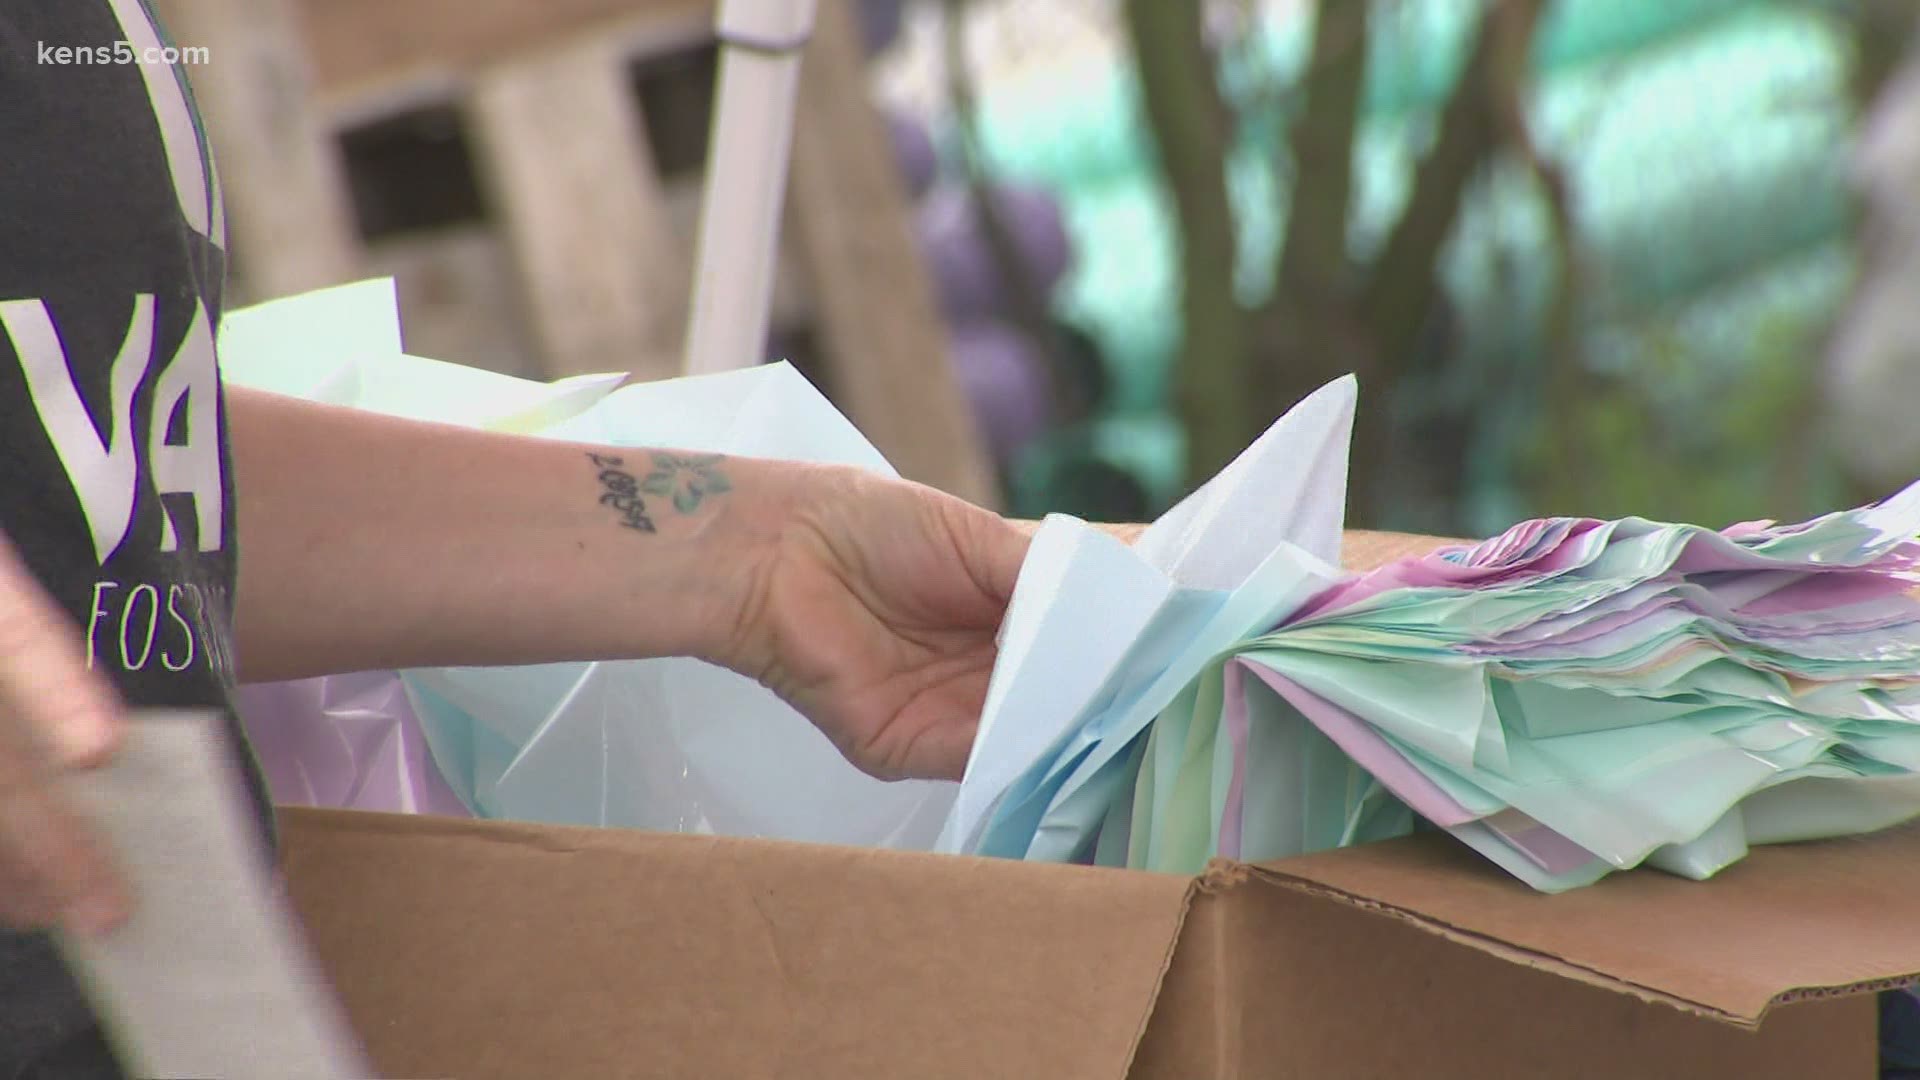 The organization said it's helping about 500 local foster children celebrate the Easter holiday this year.